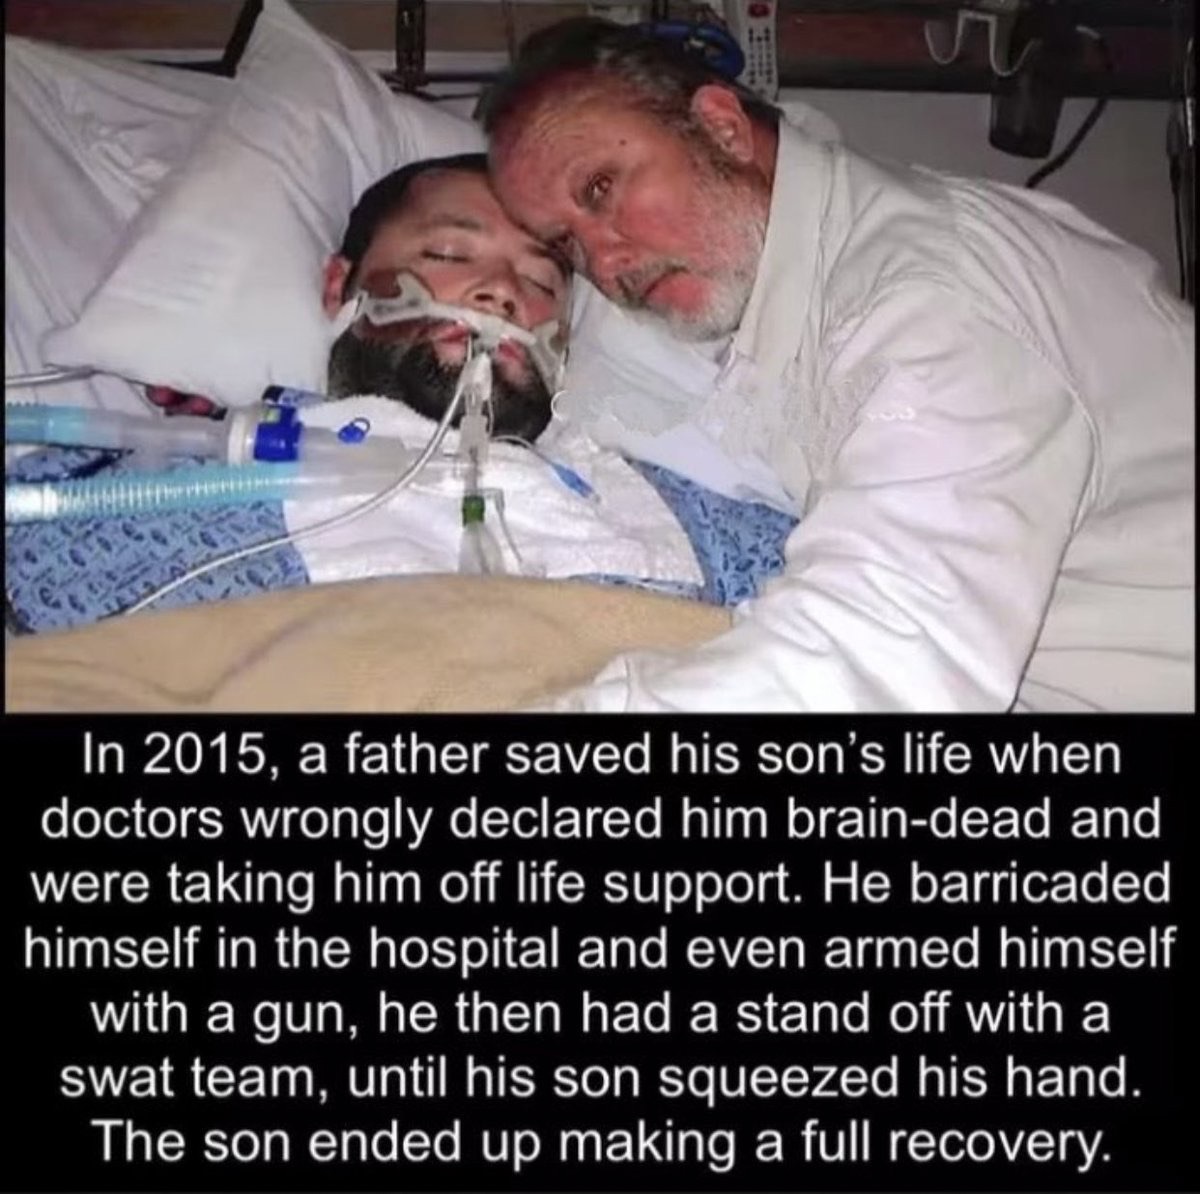 dudes post wins - man barricades himself in hospital to save son - In 2015, a father saved his son's life when doctors wrongly declared him braindead and were taking him off life support. He barricaded himself in the hospital and even armed himself with a